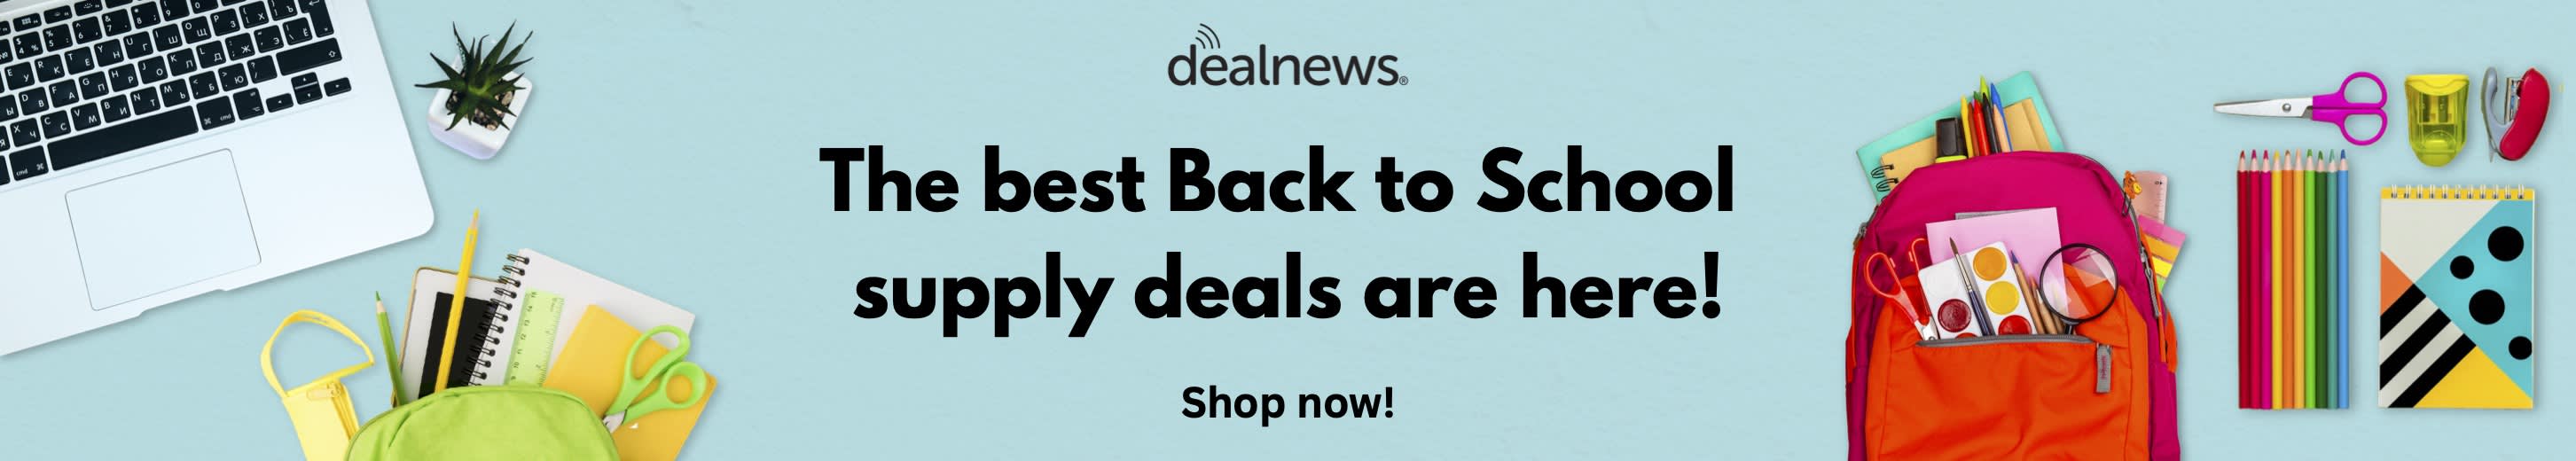 The best Back to School deals on everything you need, right here! Shop Now